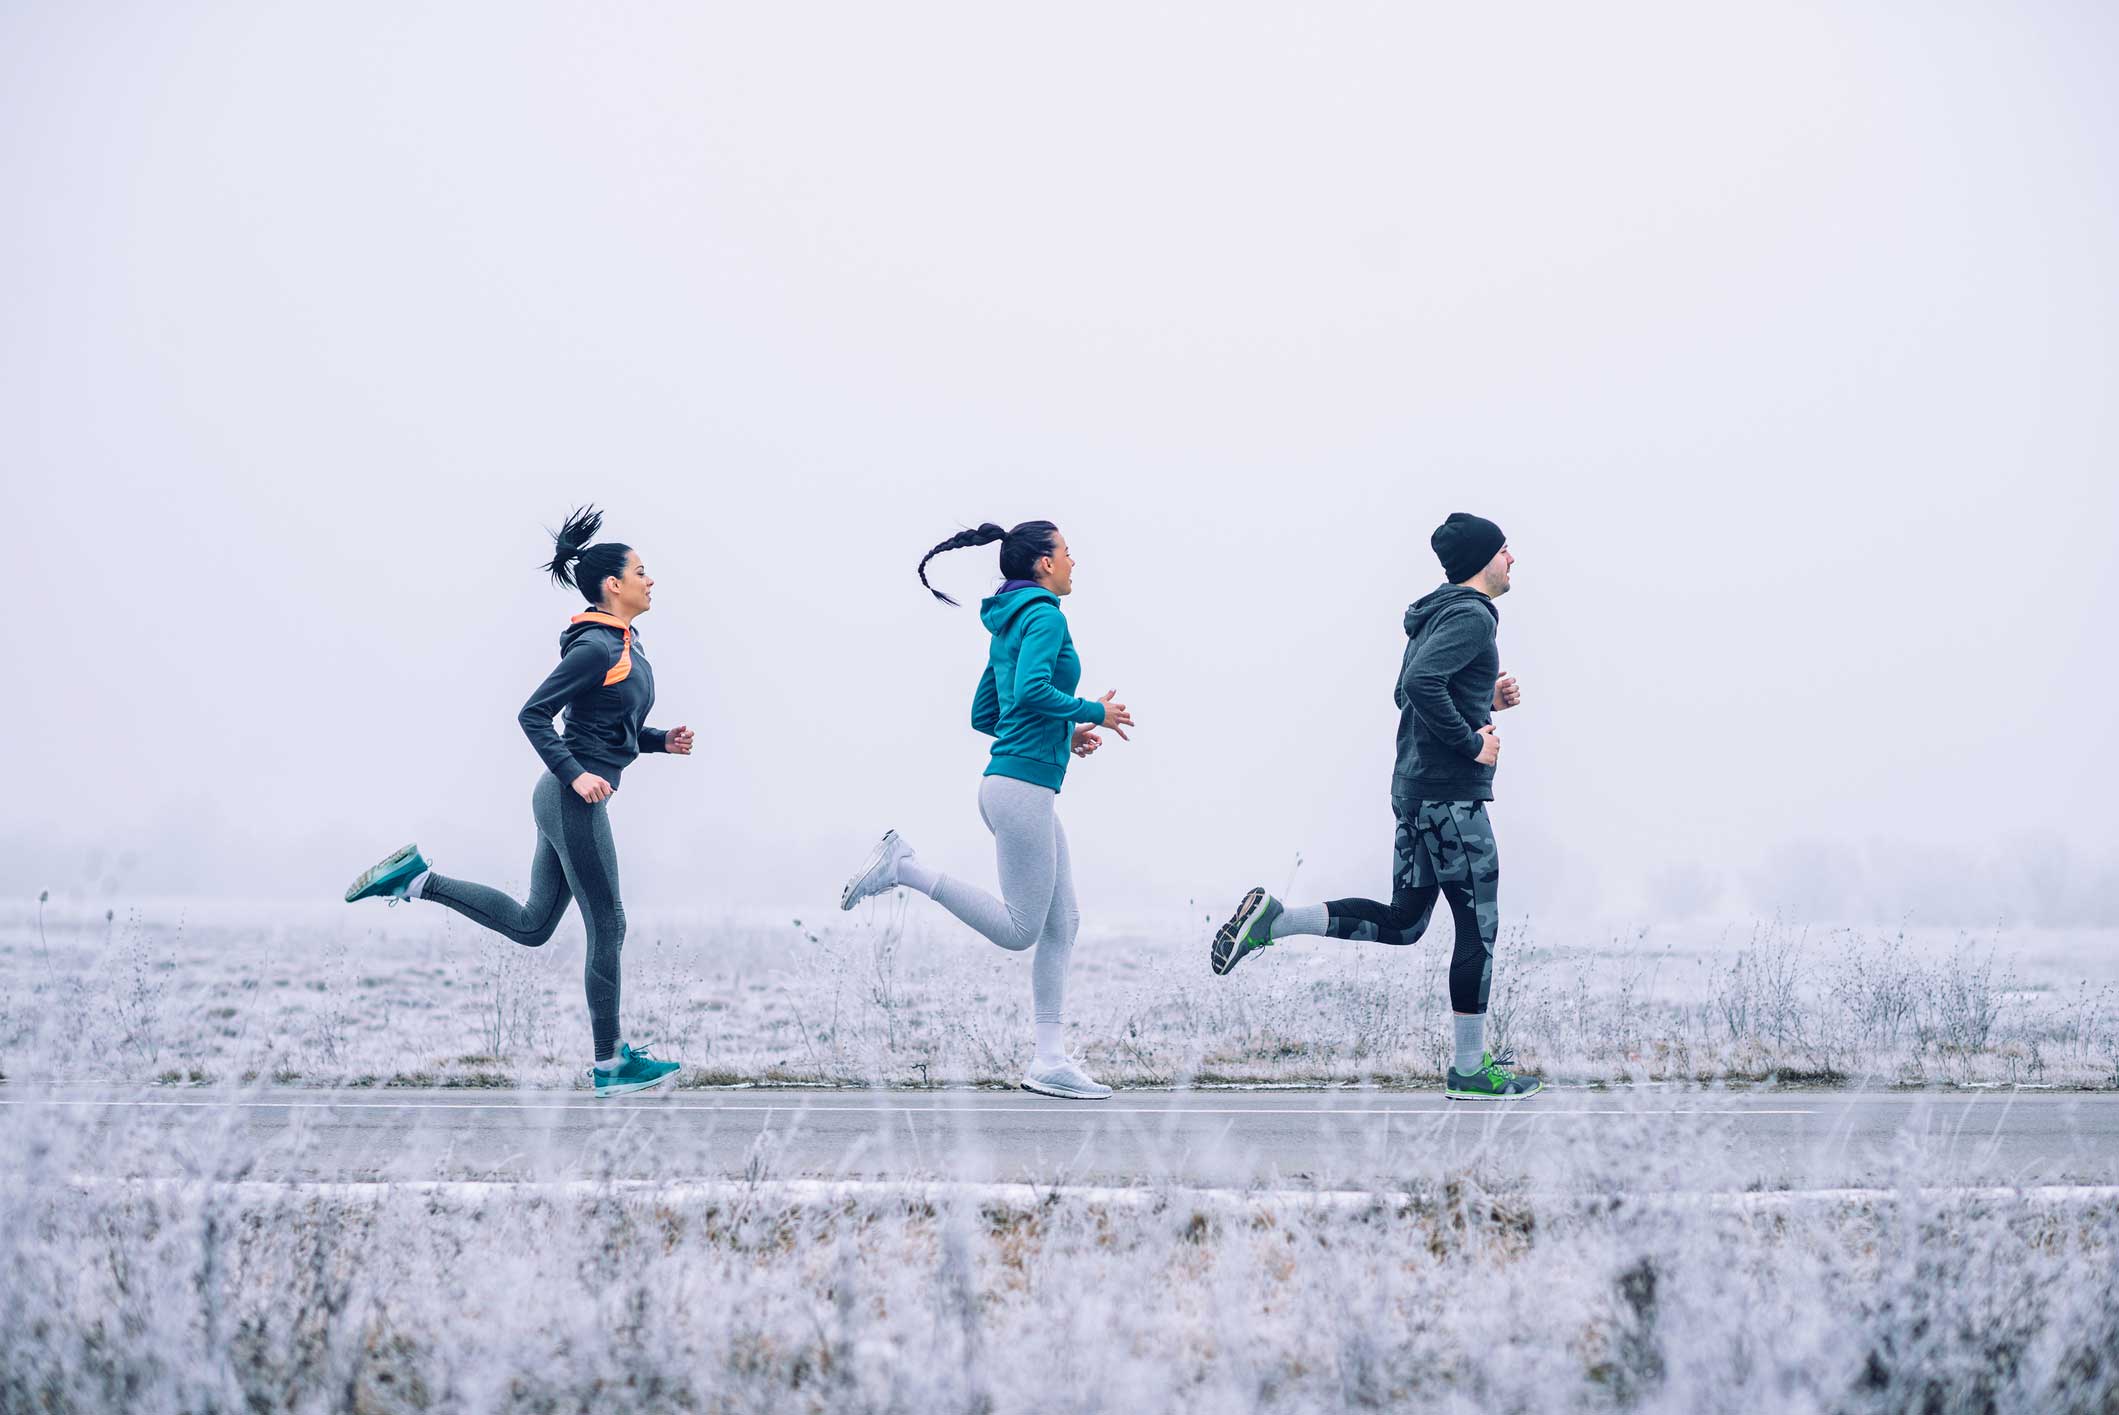 Three people jogging on road, winter background.